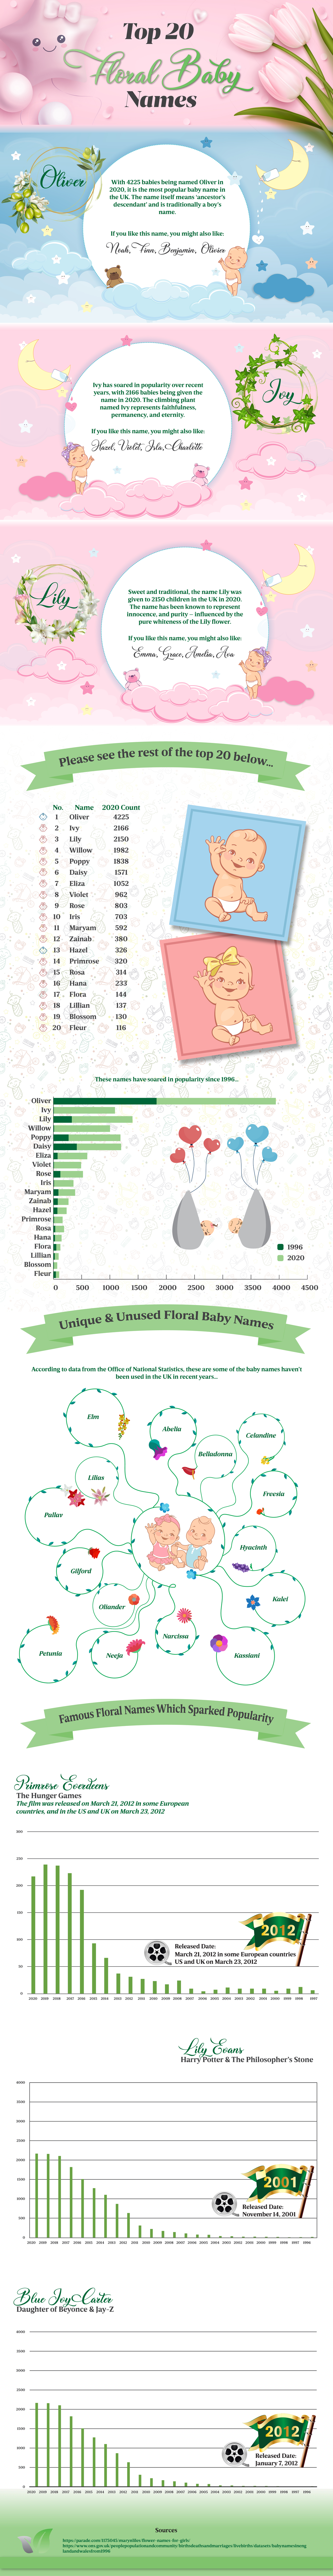 baby names infographic